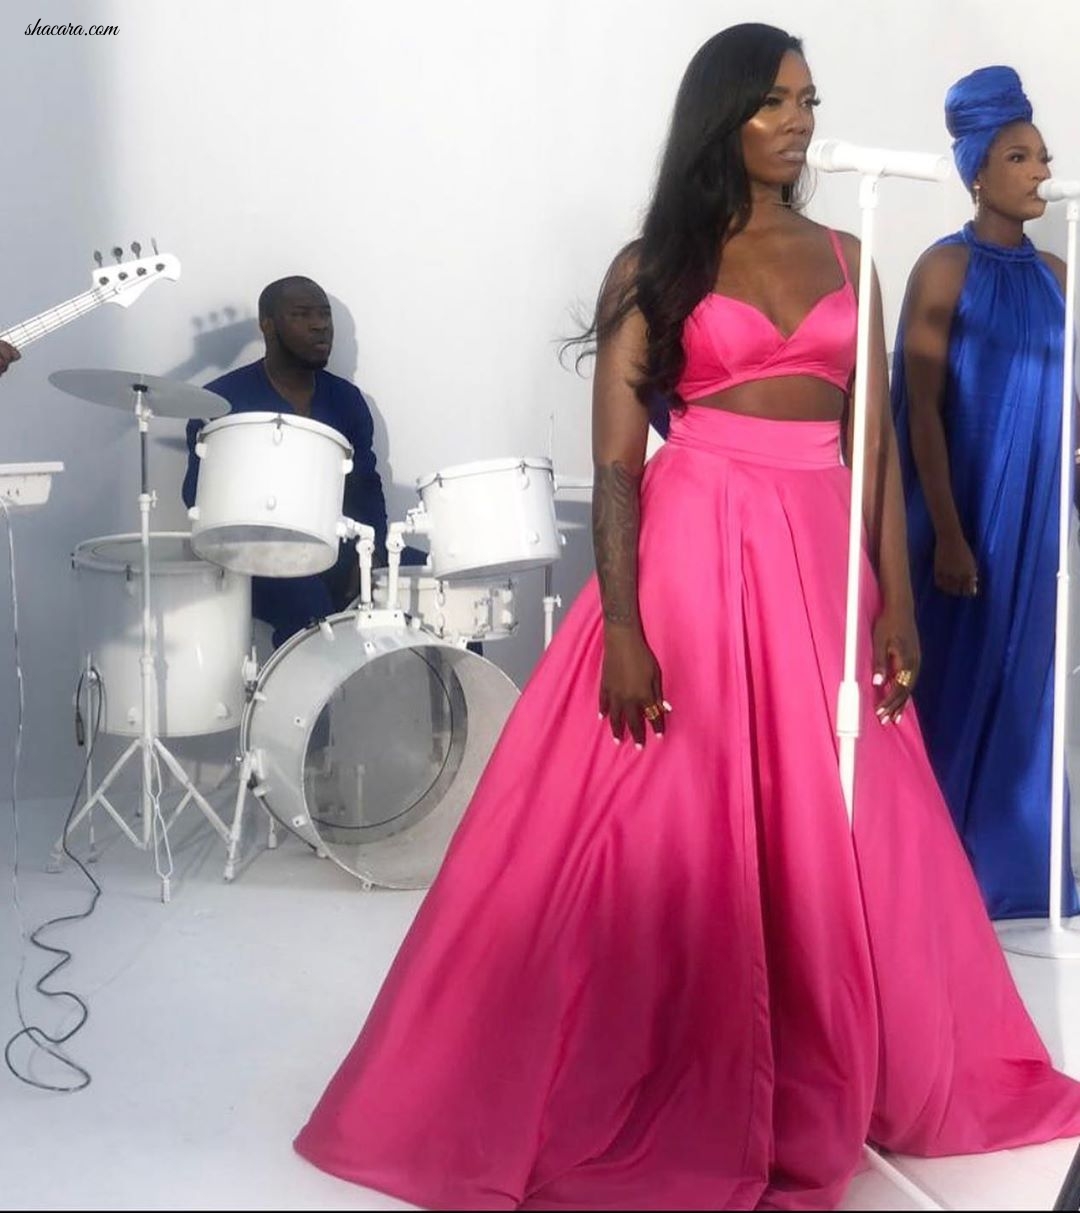 Tiwa Savage Teases Jaw-Dropping Looks From Her Upcoming “CELIA” Album